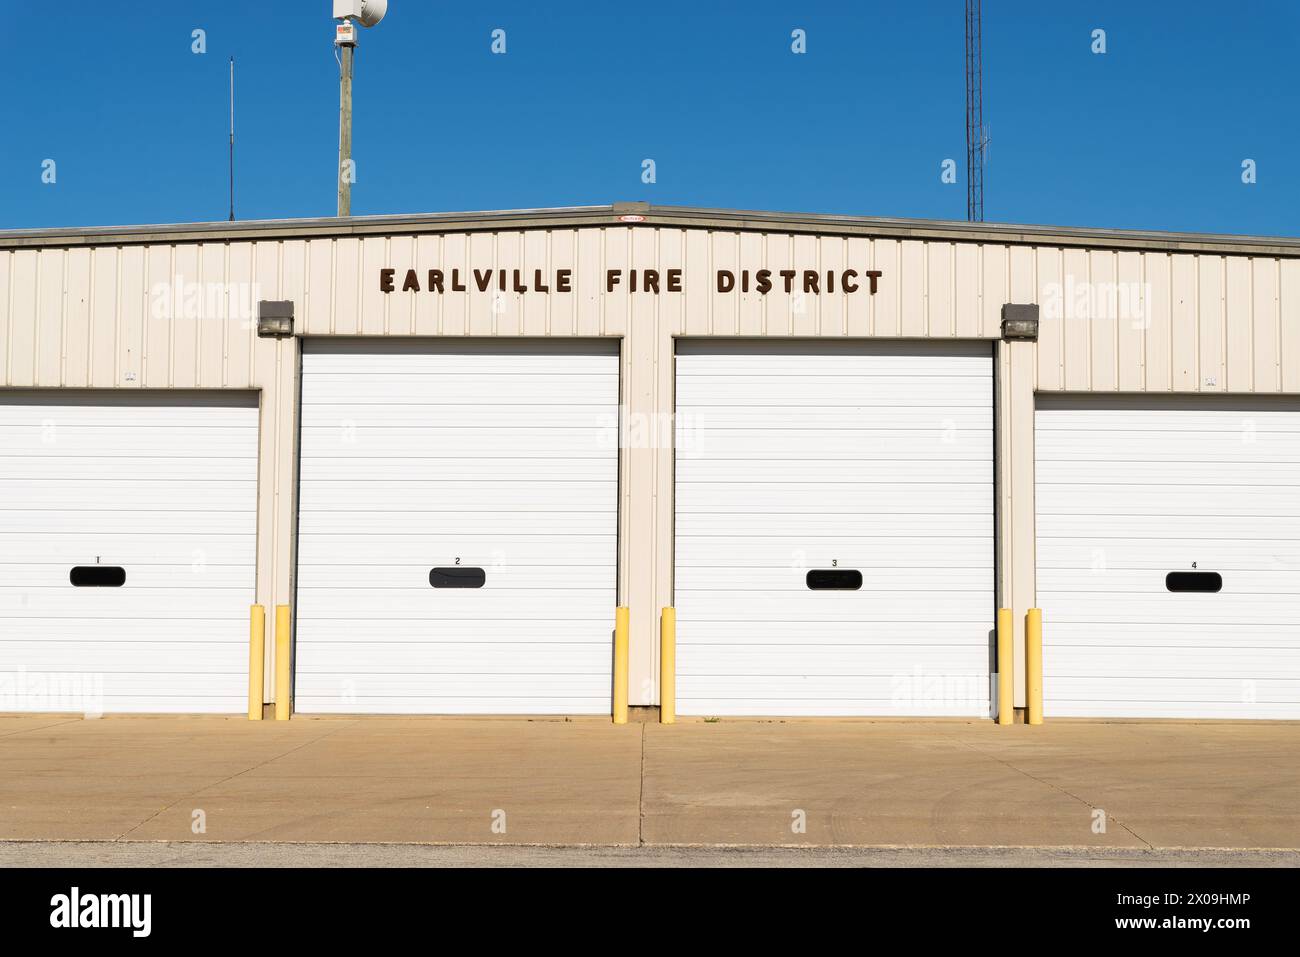 Earlville, Illinois - United States - April 8th, 2024: Exterior of the Earlville Fire District building in Earlville, Illinois, USA. Stock Photo